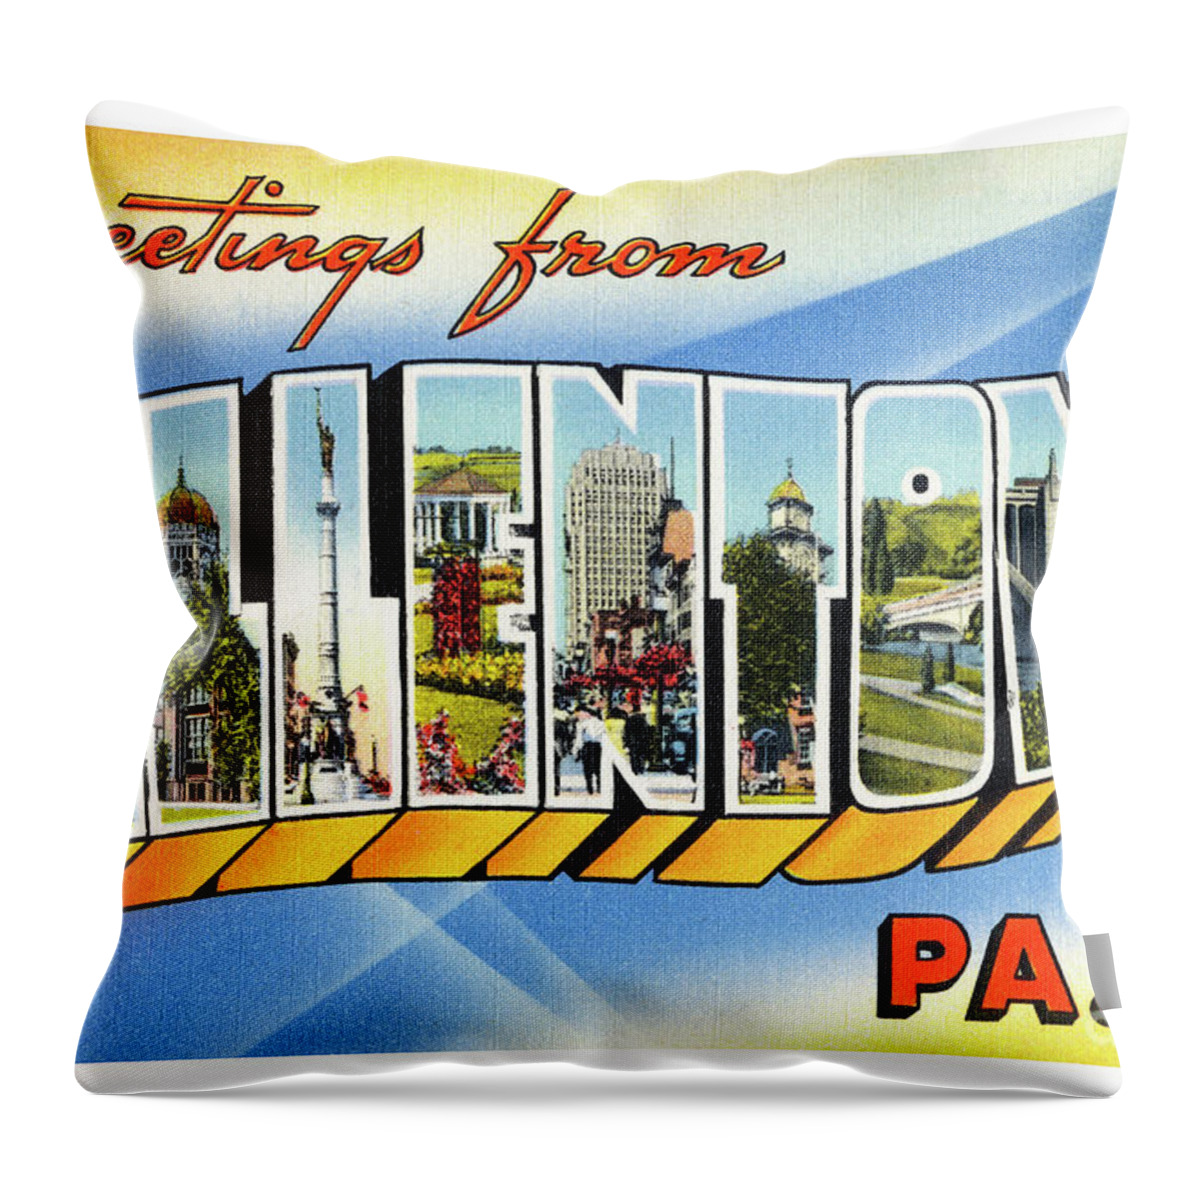 Allentown Throw Pillow featuring the photograph Allentown Greetings by Mark Miller